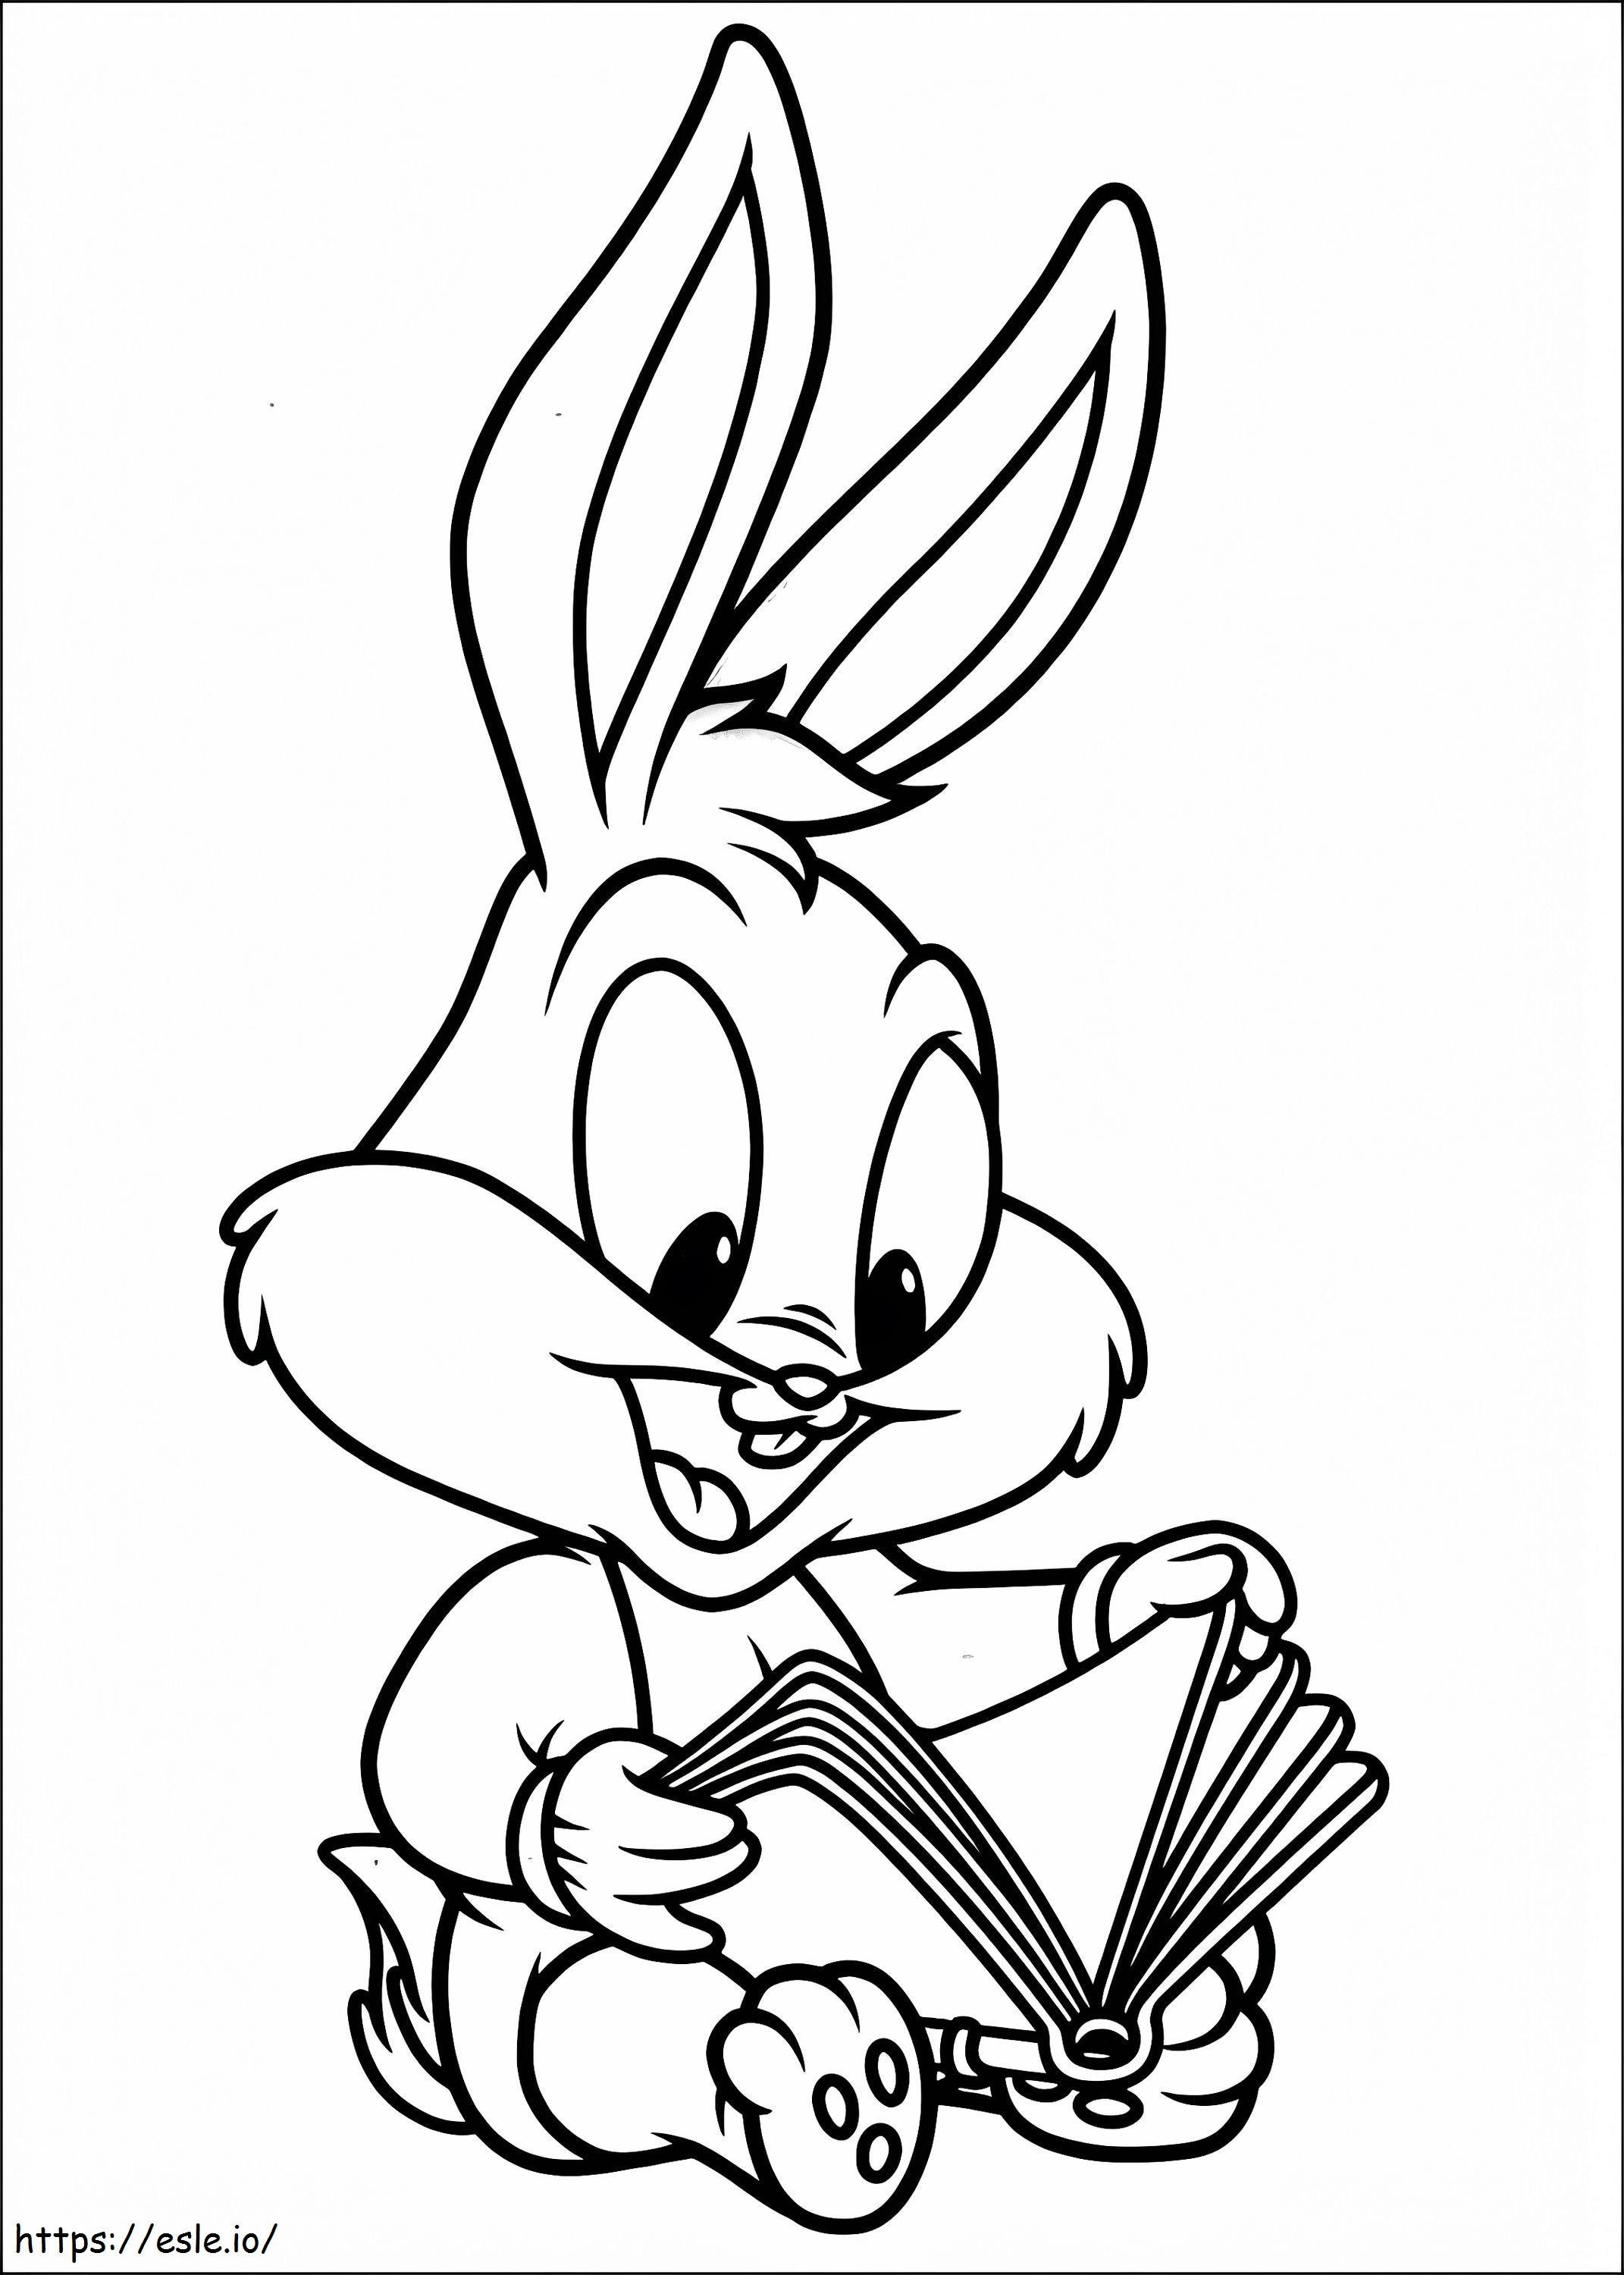 1533694138 Baby Bugs Bunny Reading A4 coloring page